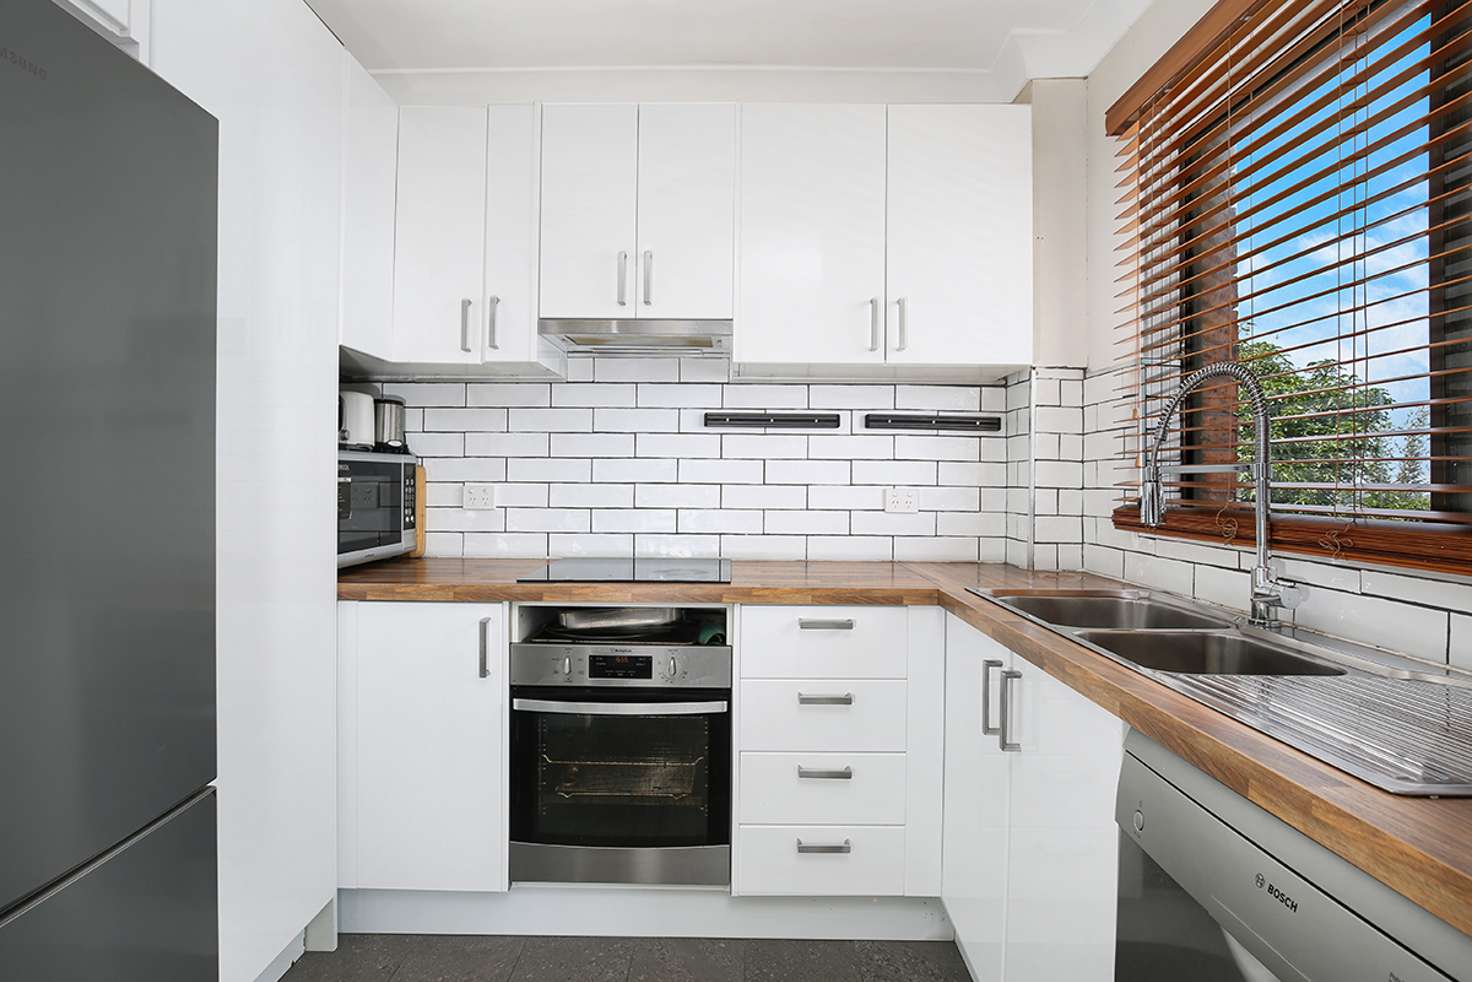 Main view of Homely apartment listing, 7/15 Kembla Street, Wollongong NSW 2500